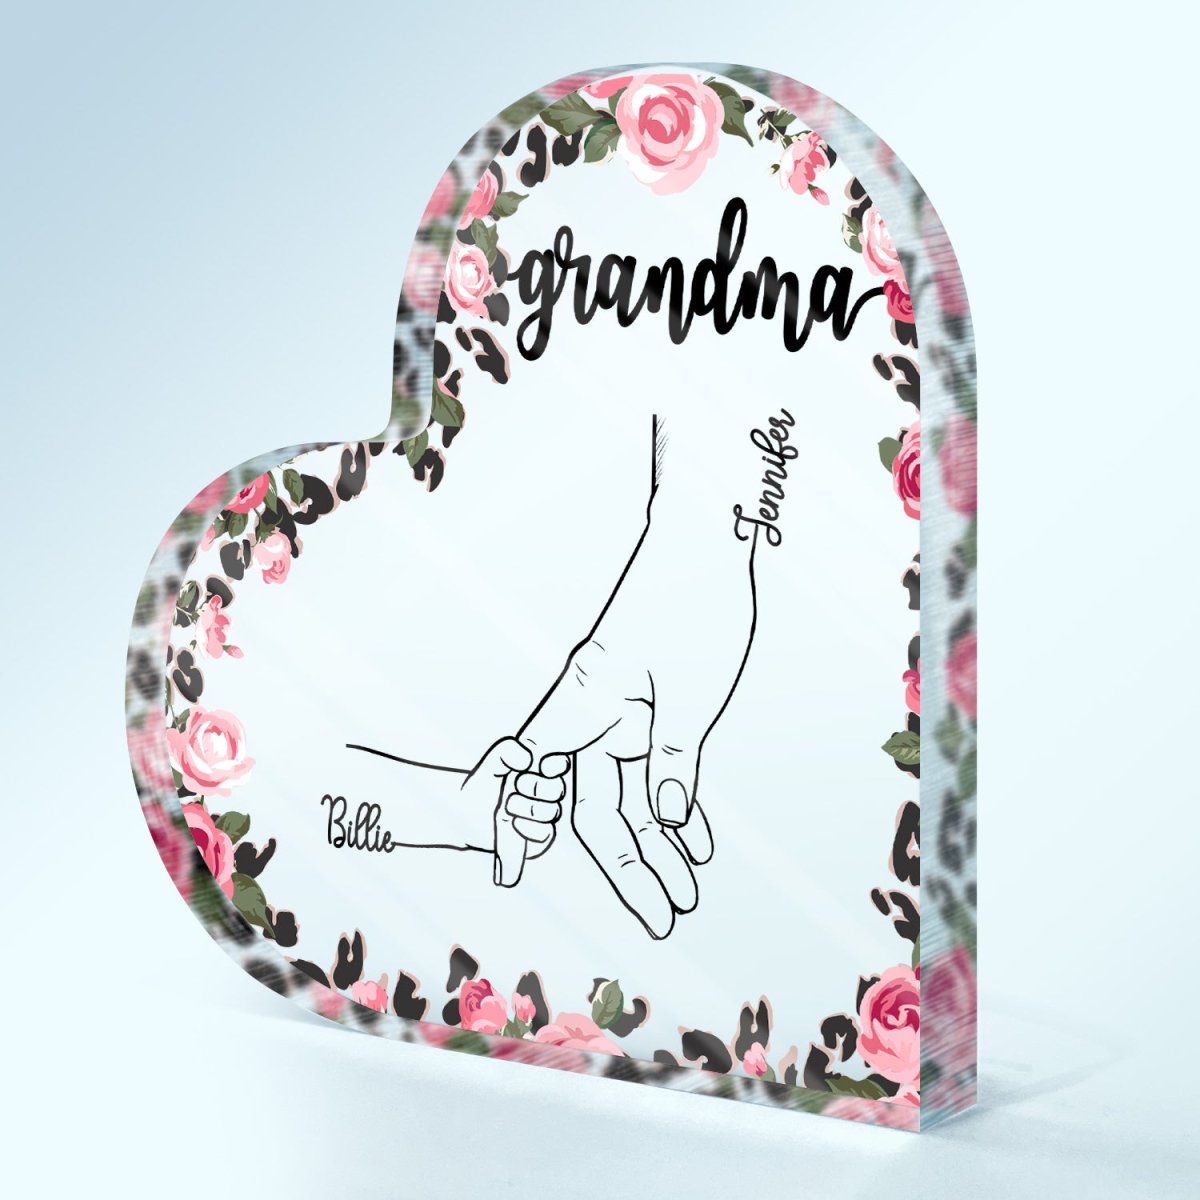 Family - Hand In Hand Leopard Flower - Gift For Mom, Mum, Nana, Grandma - Personalized Heart Acrylic Plaque - The Next Custom Gift